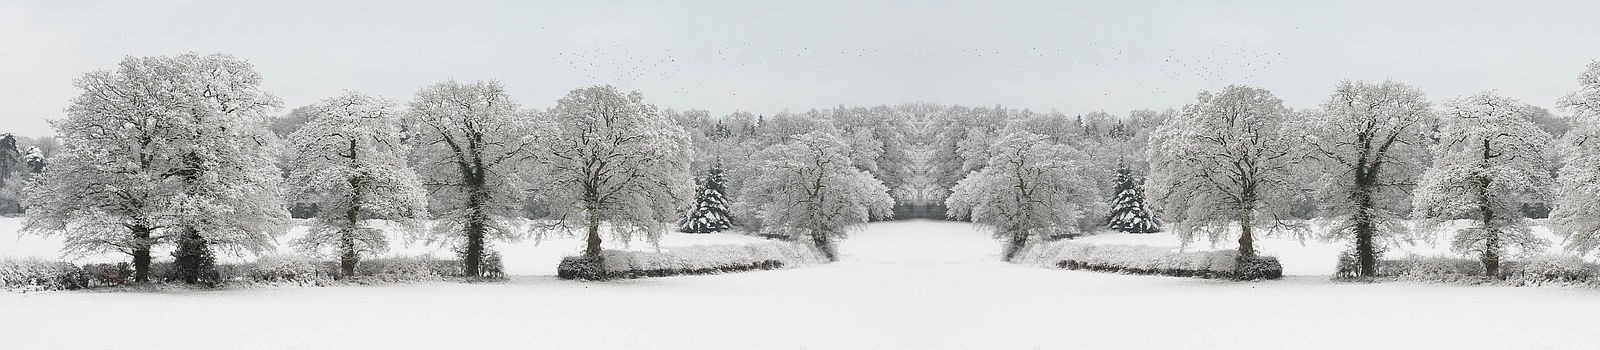 Snow-covered trees in a snow-covered park